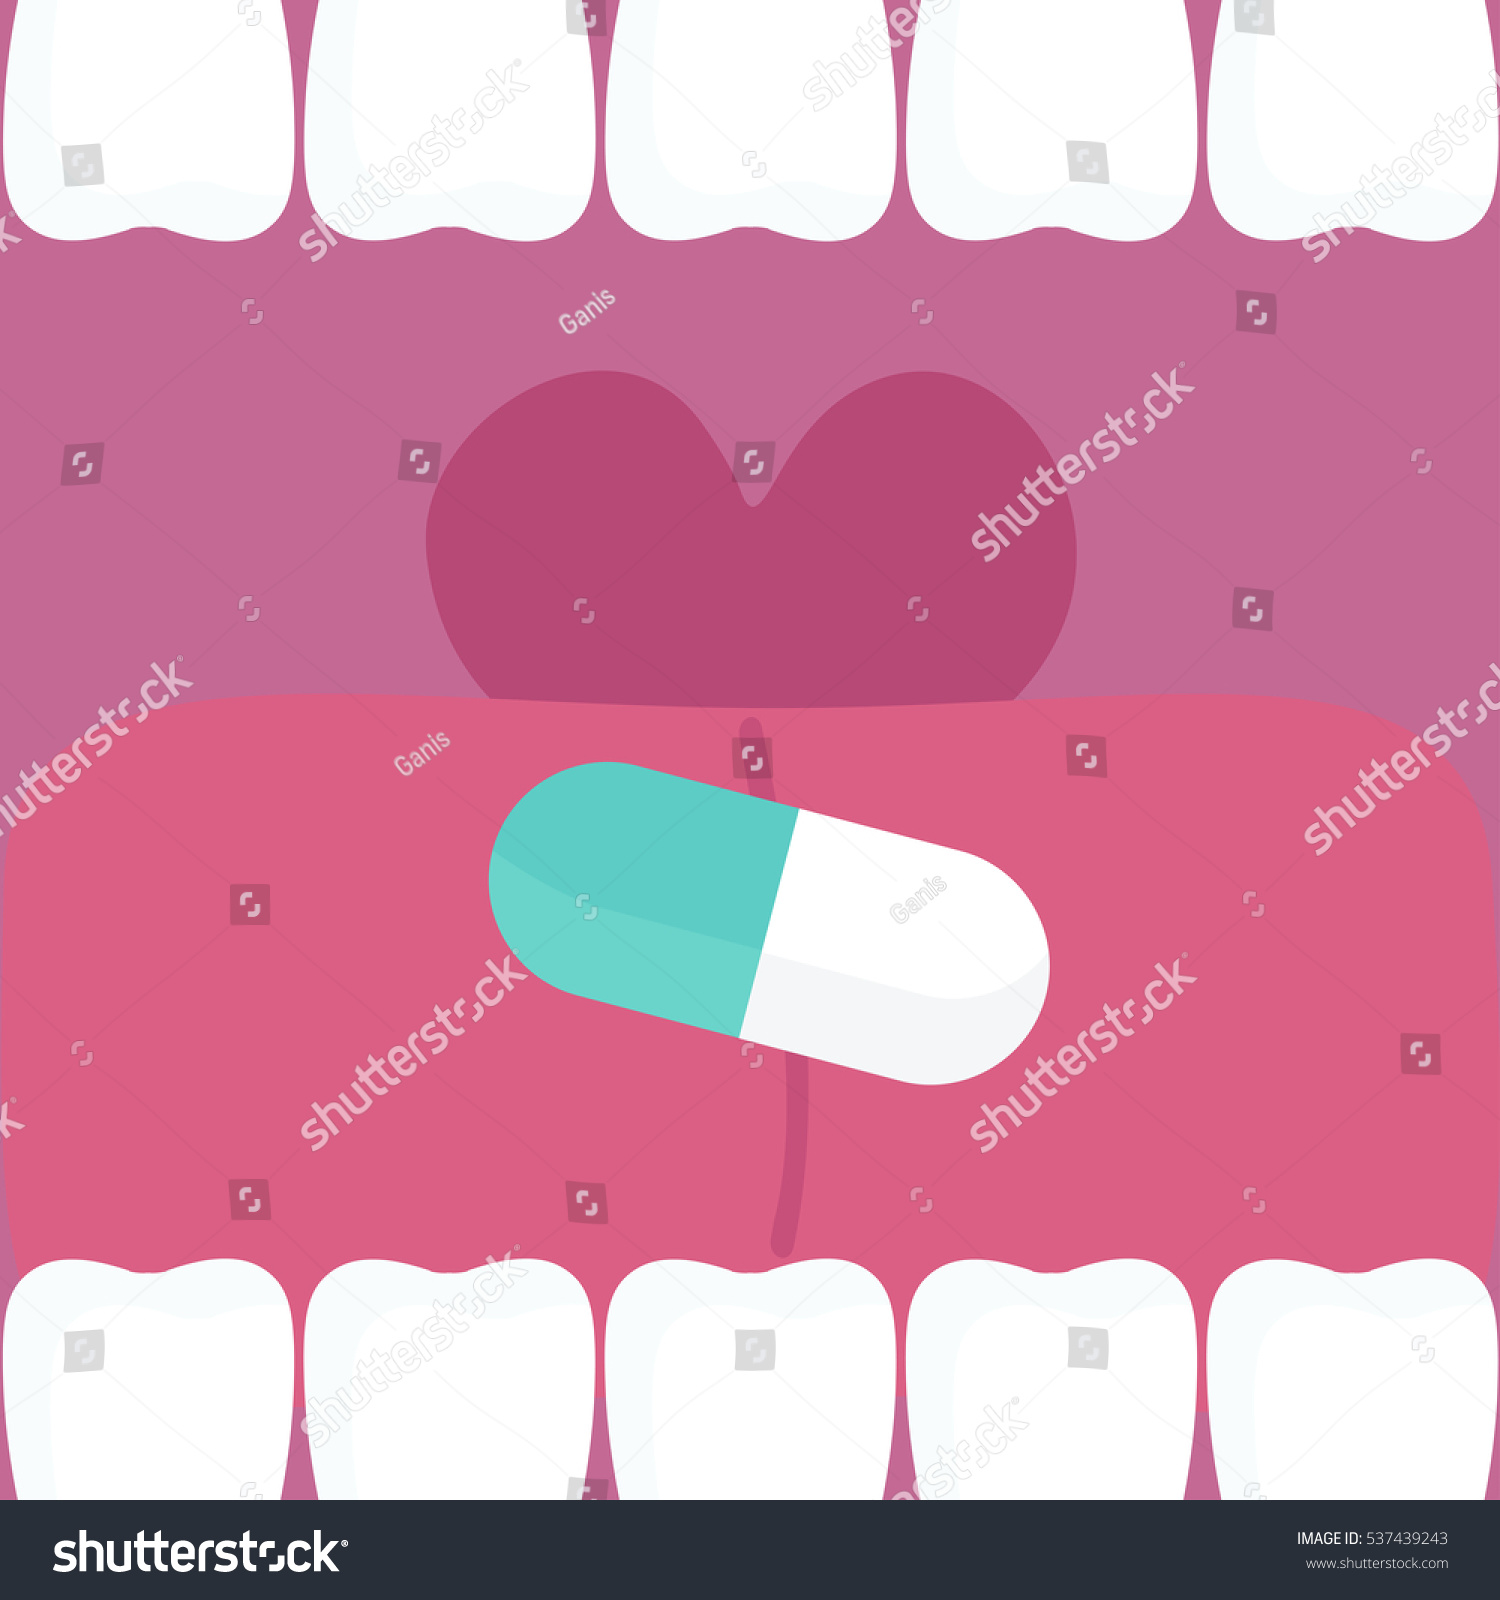 Open Mouth Tongue Teeth Swallow Pill Stock Vector Royalty Free 537439243 